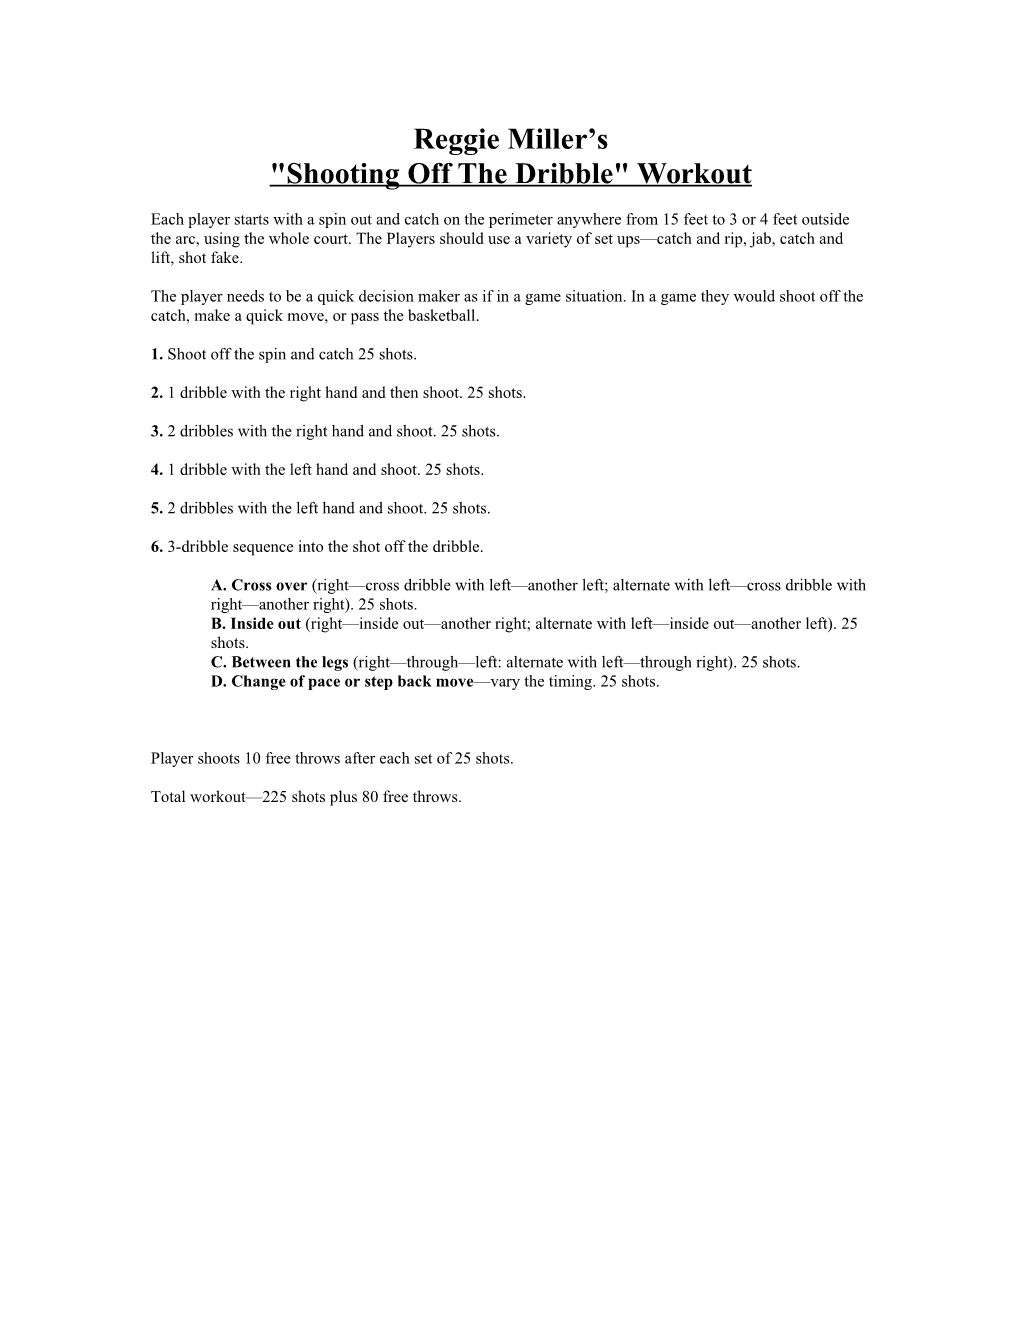 Shooting Off the Dribble Workout